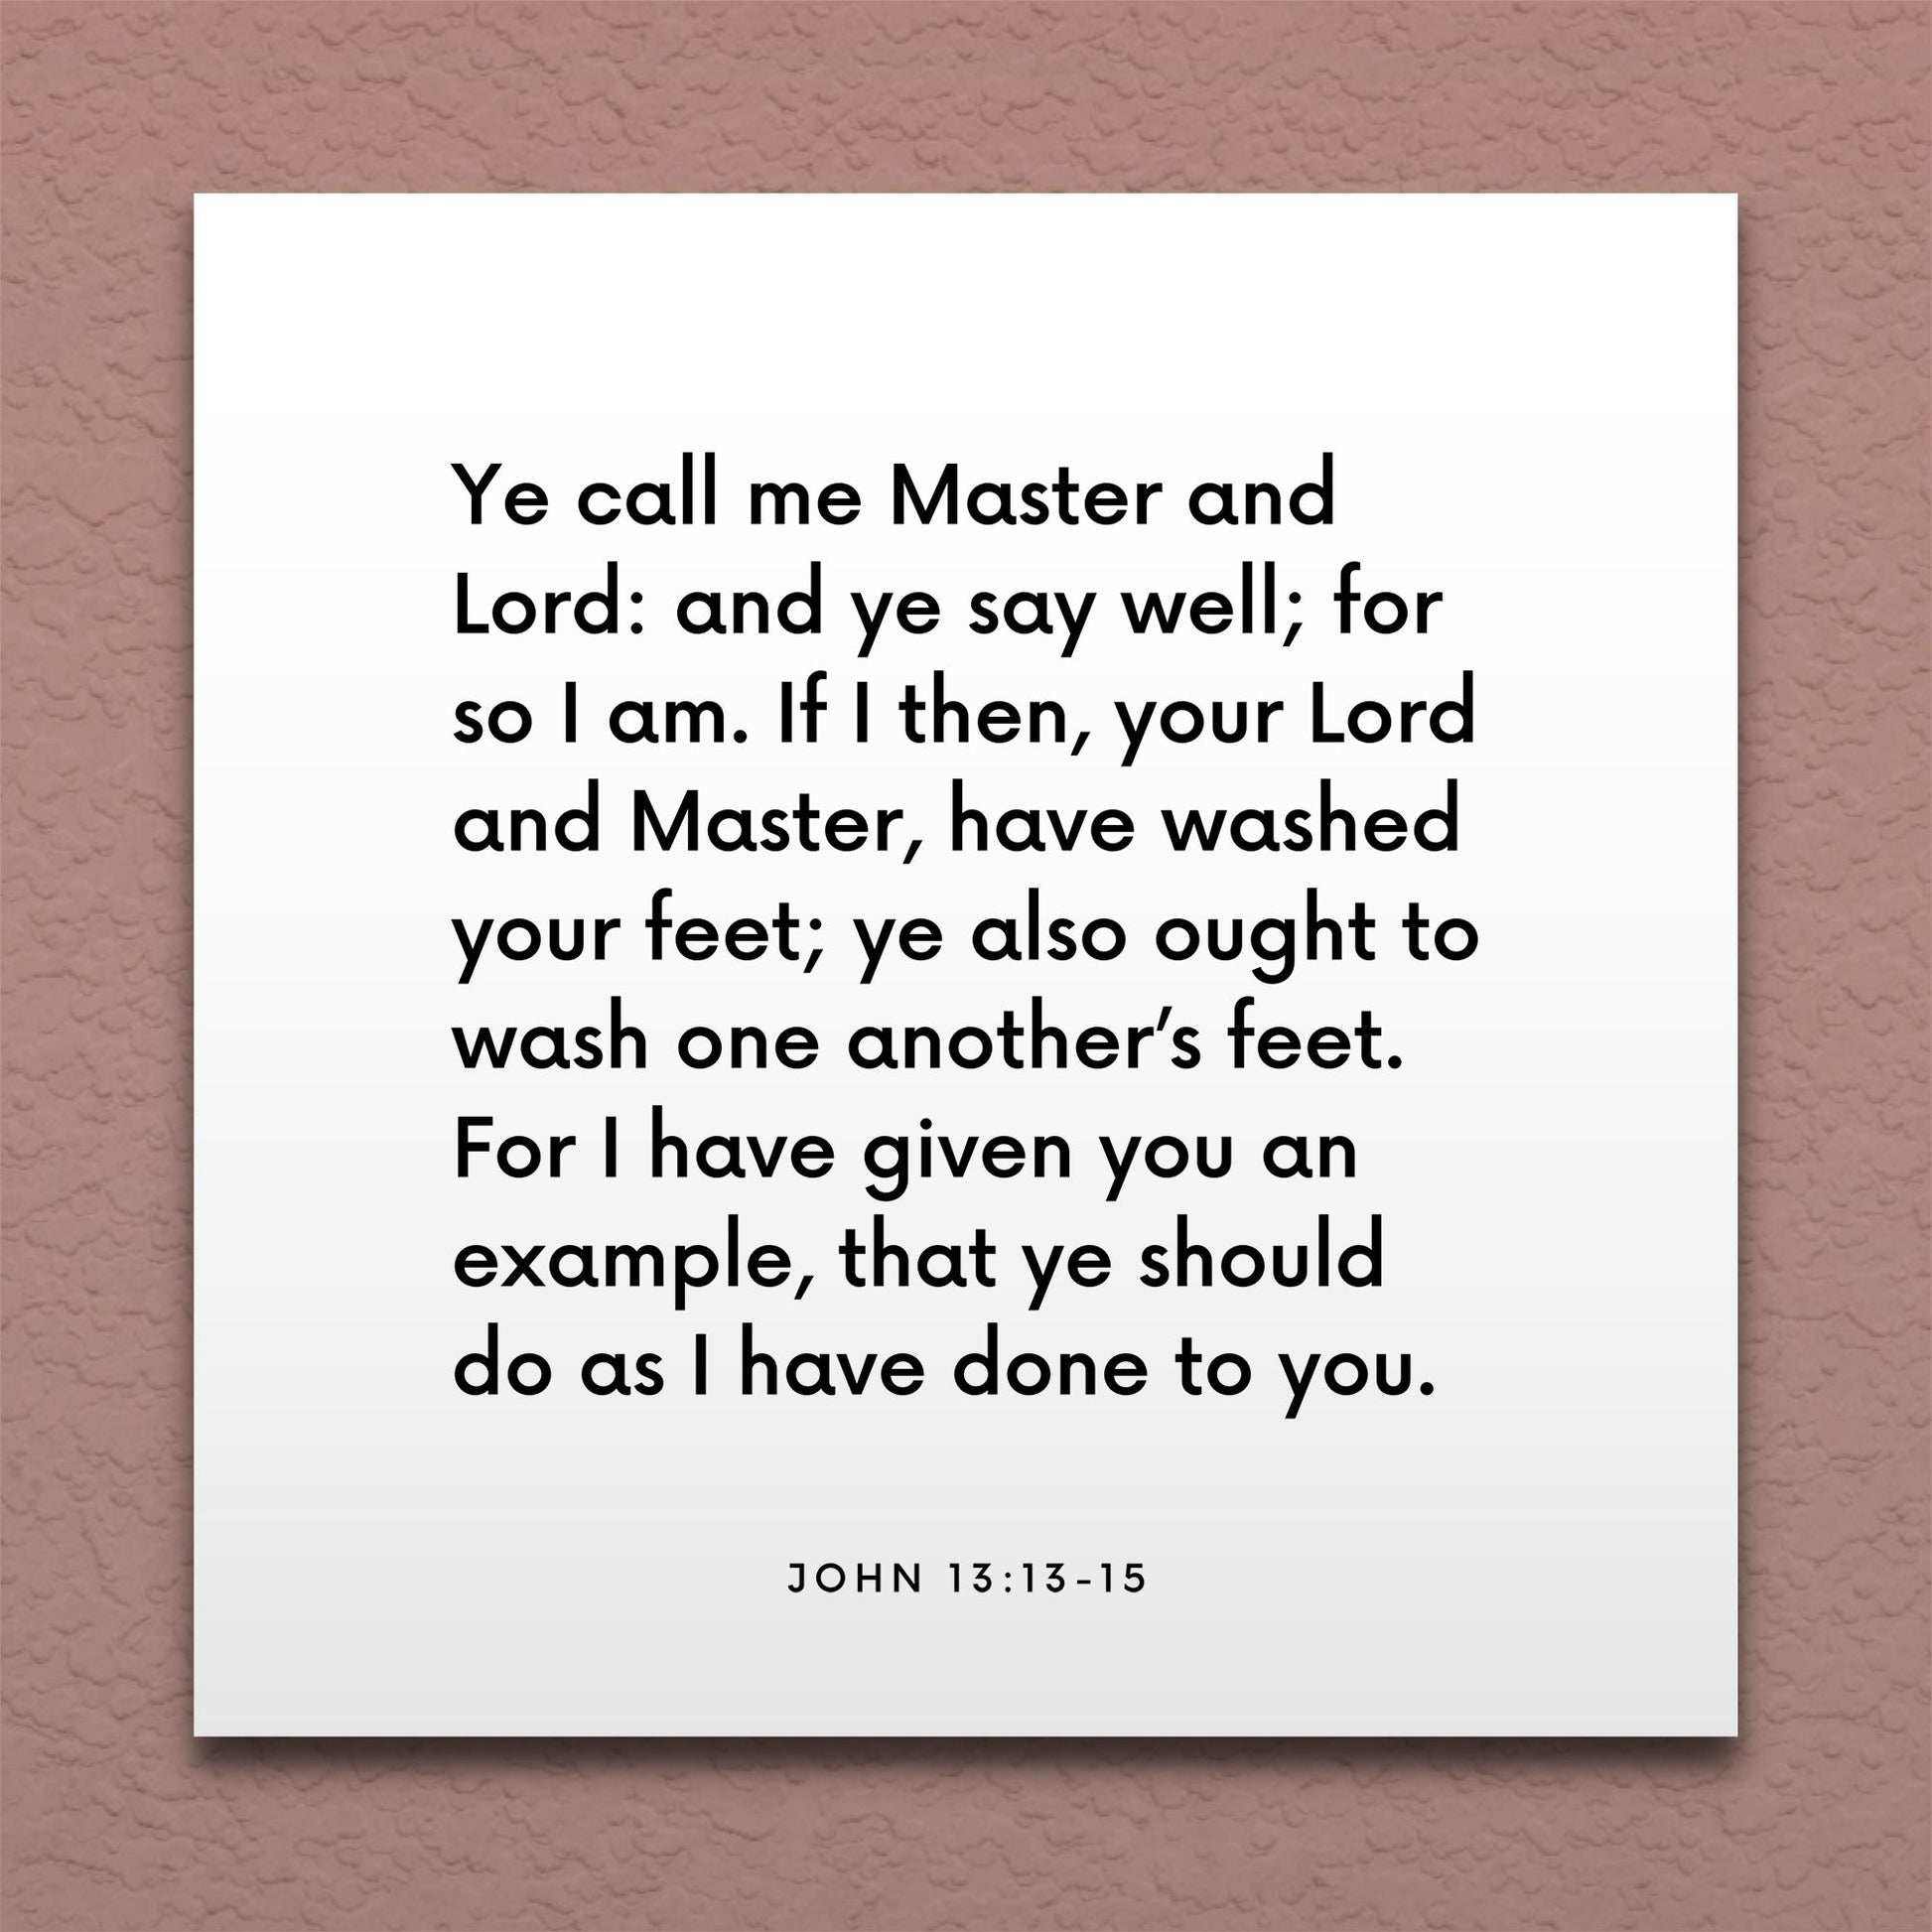 Wall-mounted scripture tile for John 13:13-15 - "I have given you an example, that ye should do as I have"